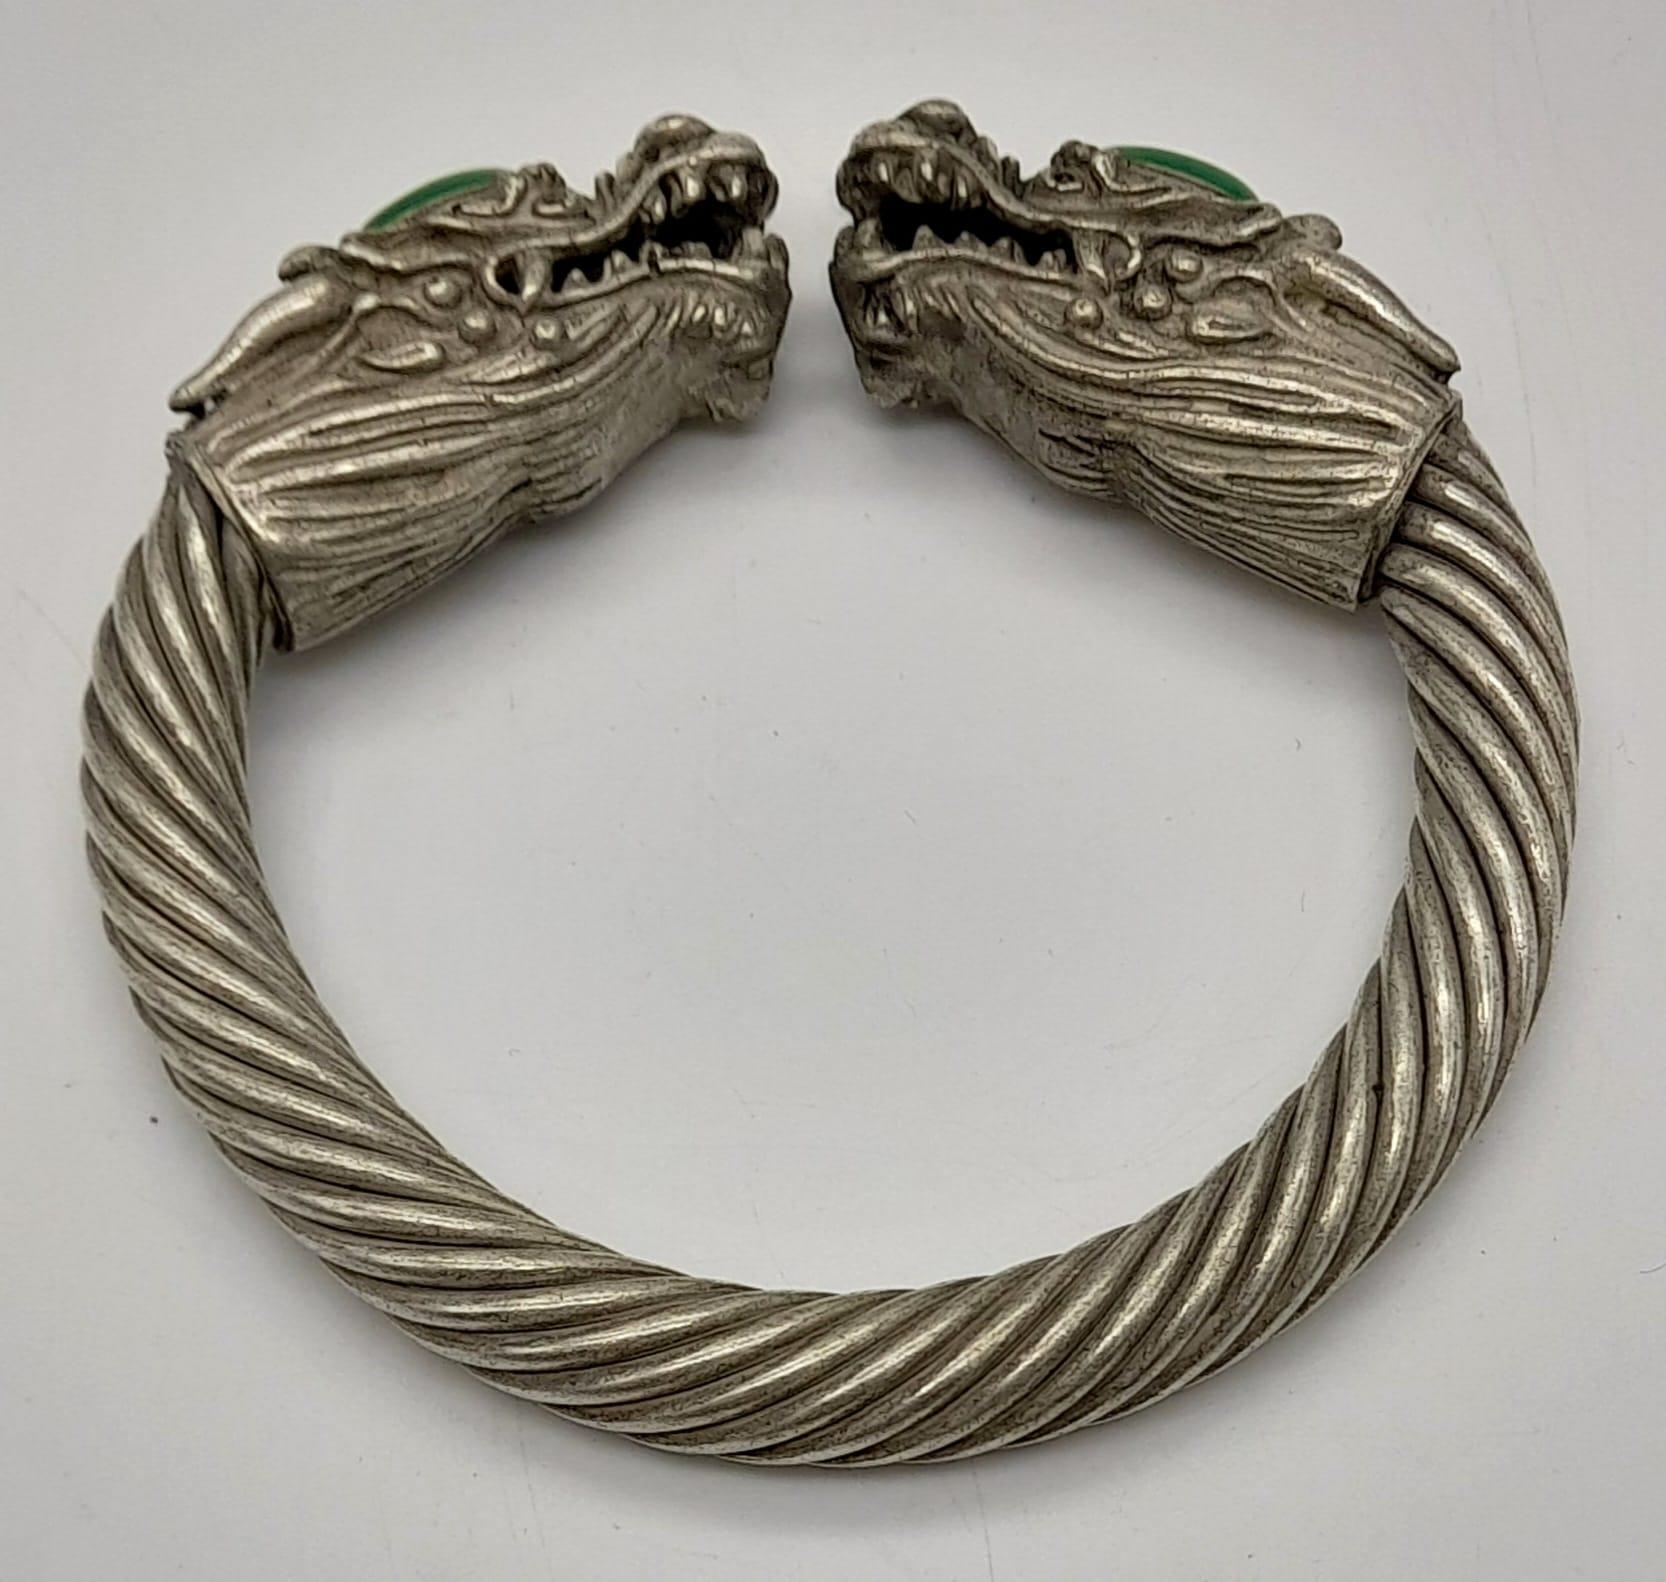 A Tibetan Silver Twin Dragon Twisted Bangle/Bracelet with Green Jade head decoration. 7cm inner - Image 3 of 3